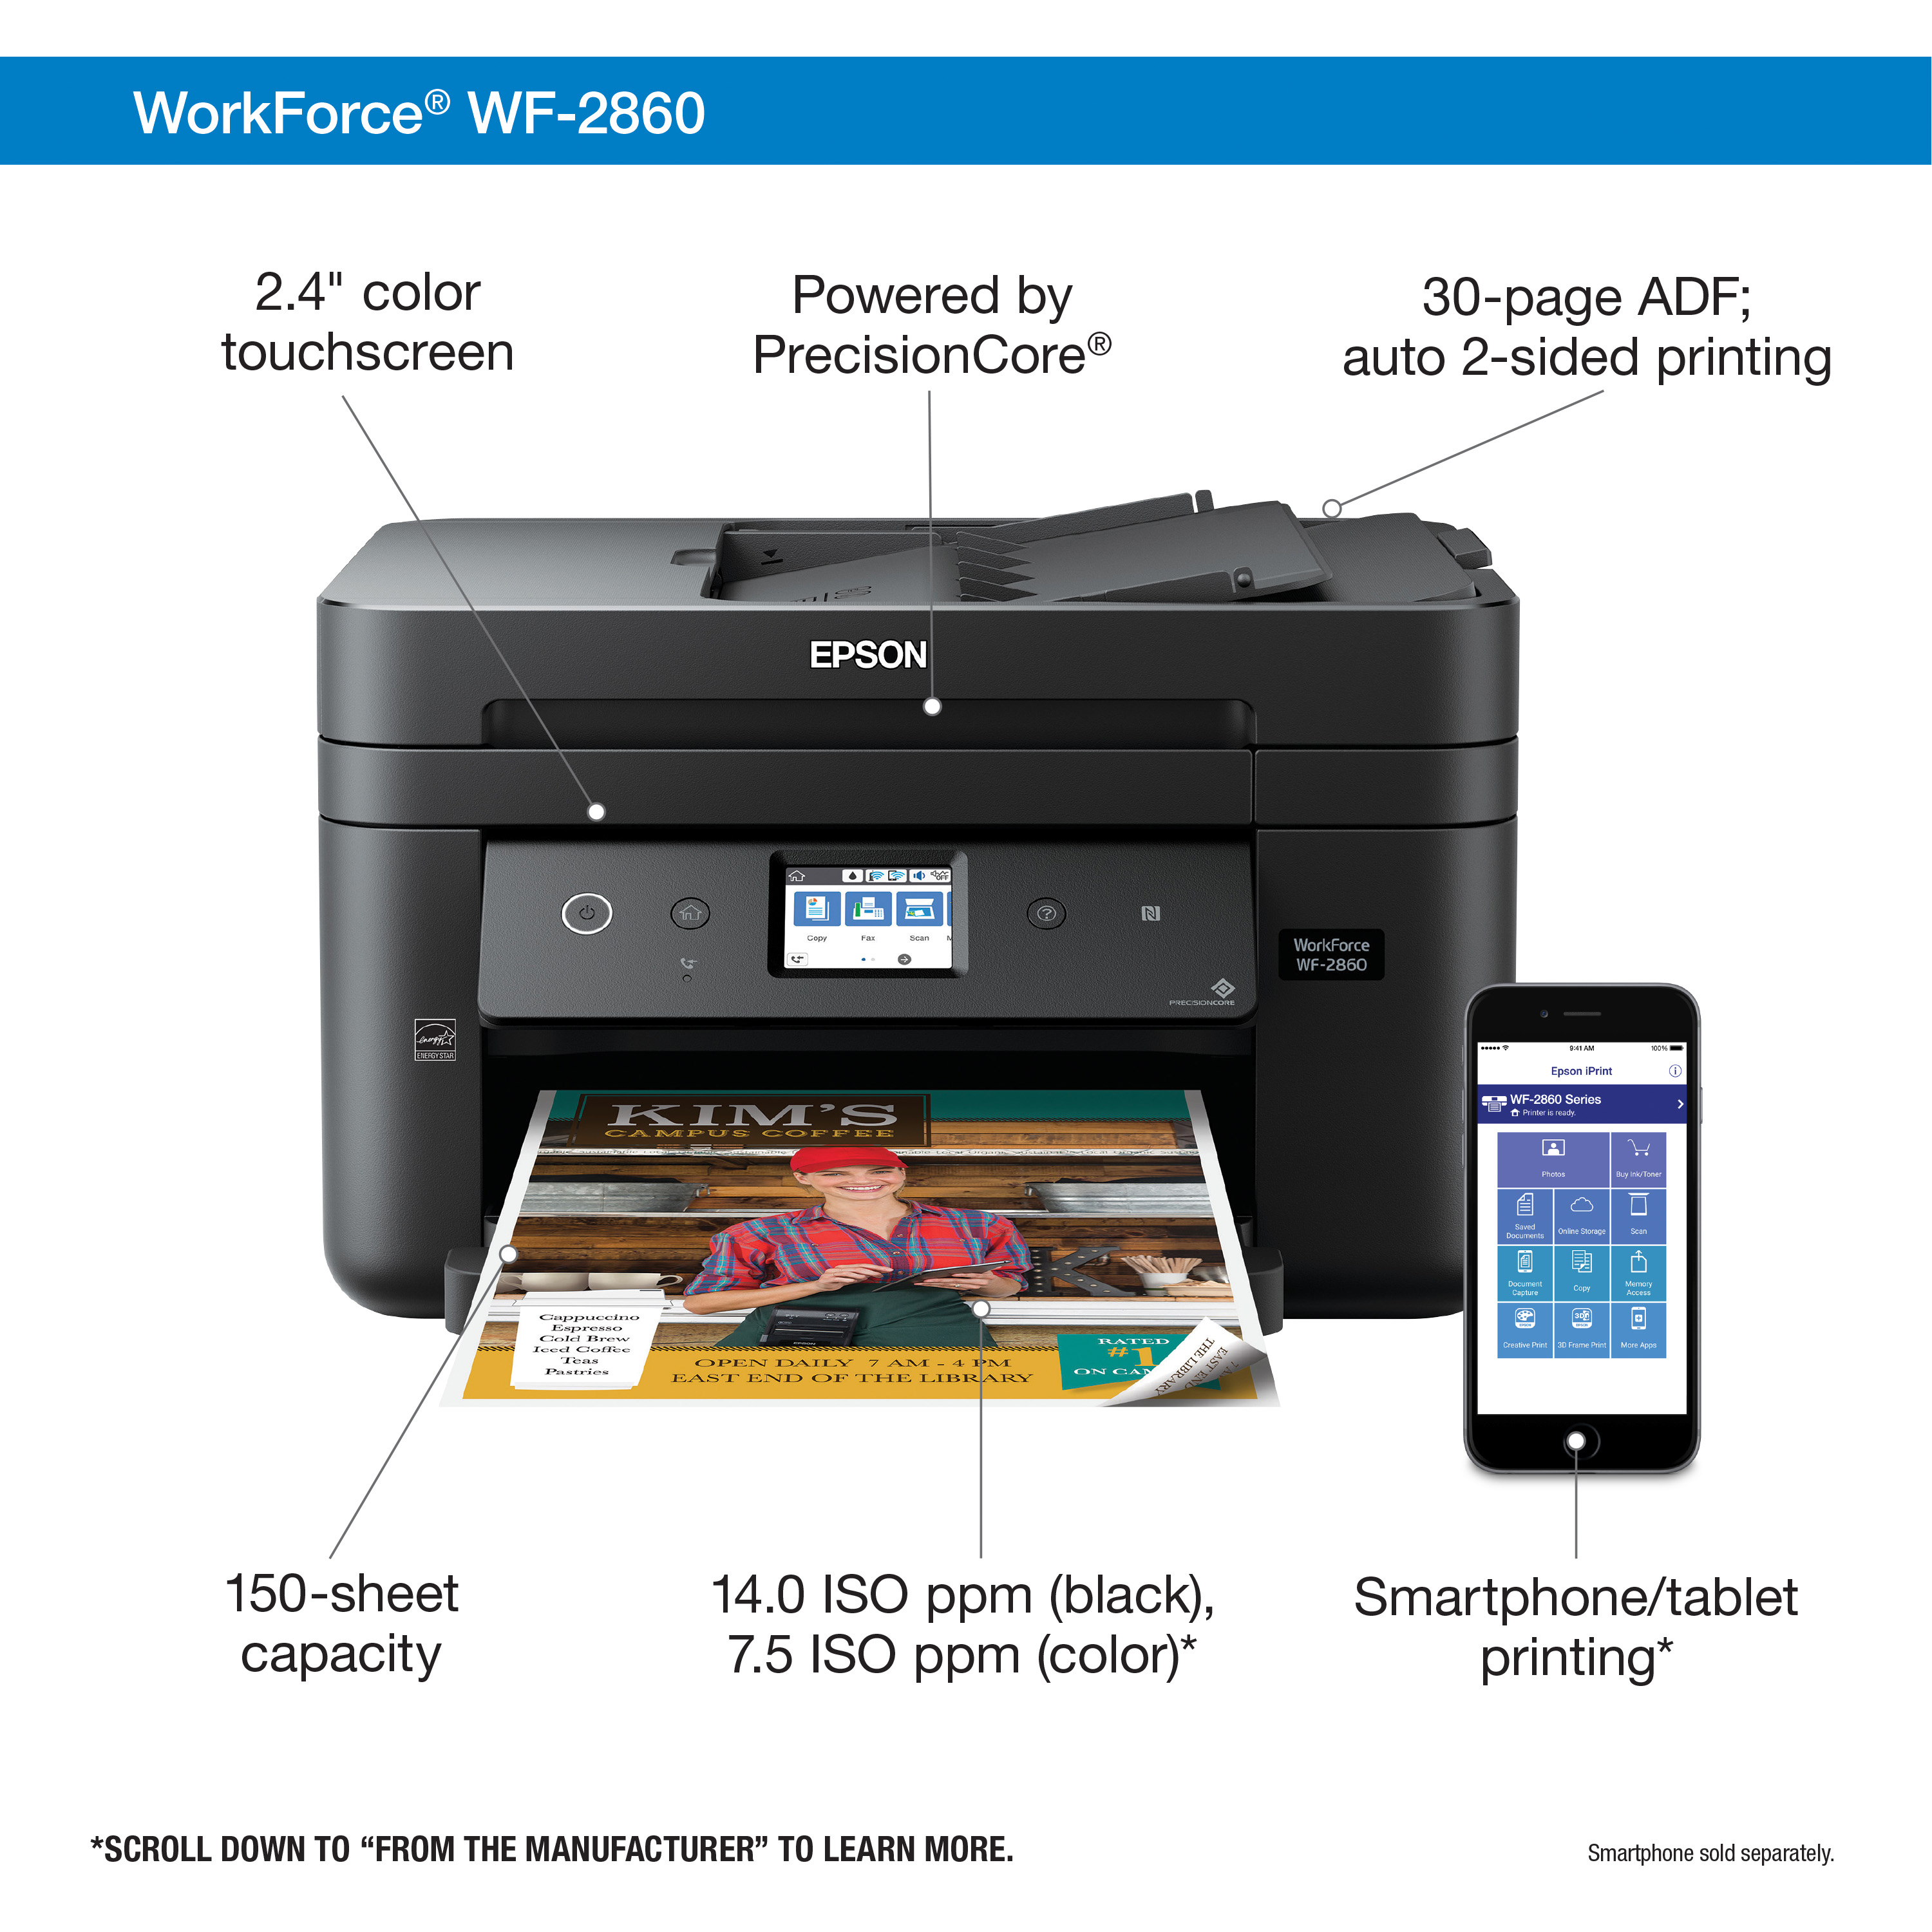 Epson WorkForce WF-2860 All-in-One Wireless Color Printer with Scanner, Copier, Fax, Ethernet, Wi-Fi Direct and NFC - image 2 of 6